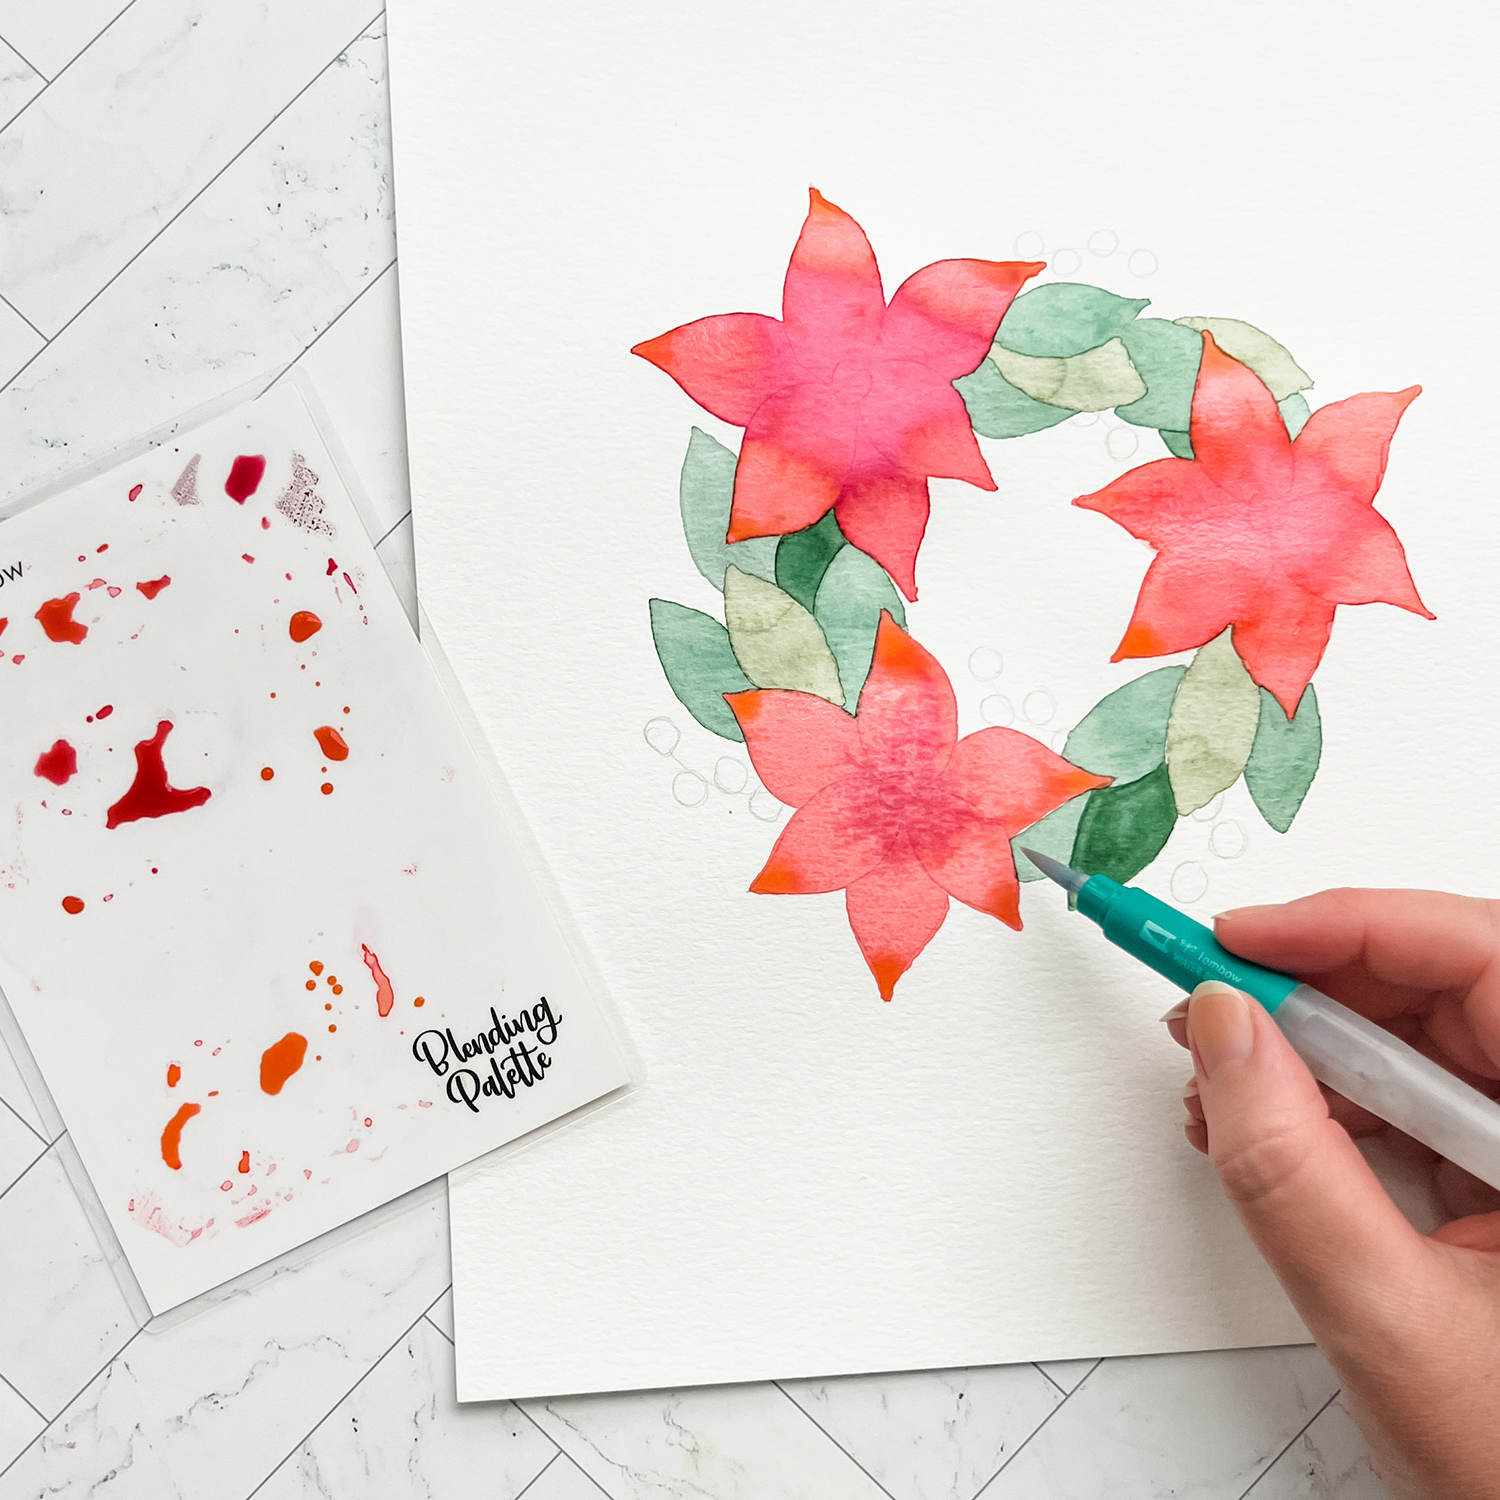 Paint a Wreath with Markers by Jessica Mack on behalf of Tombow